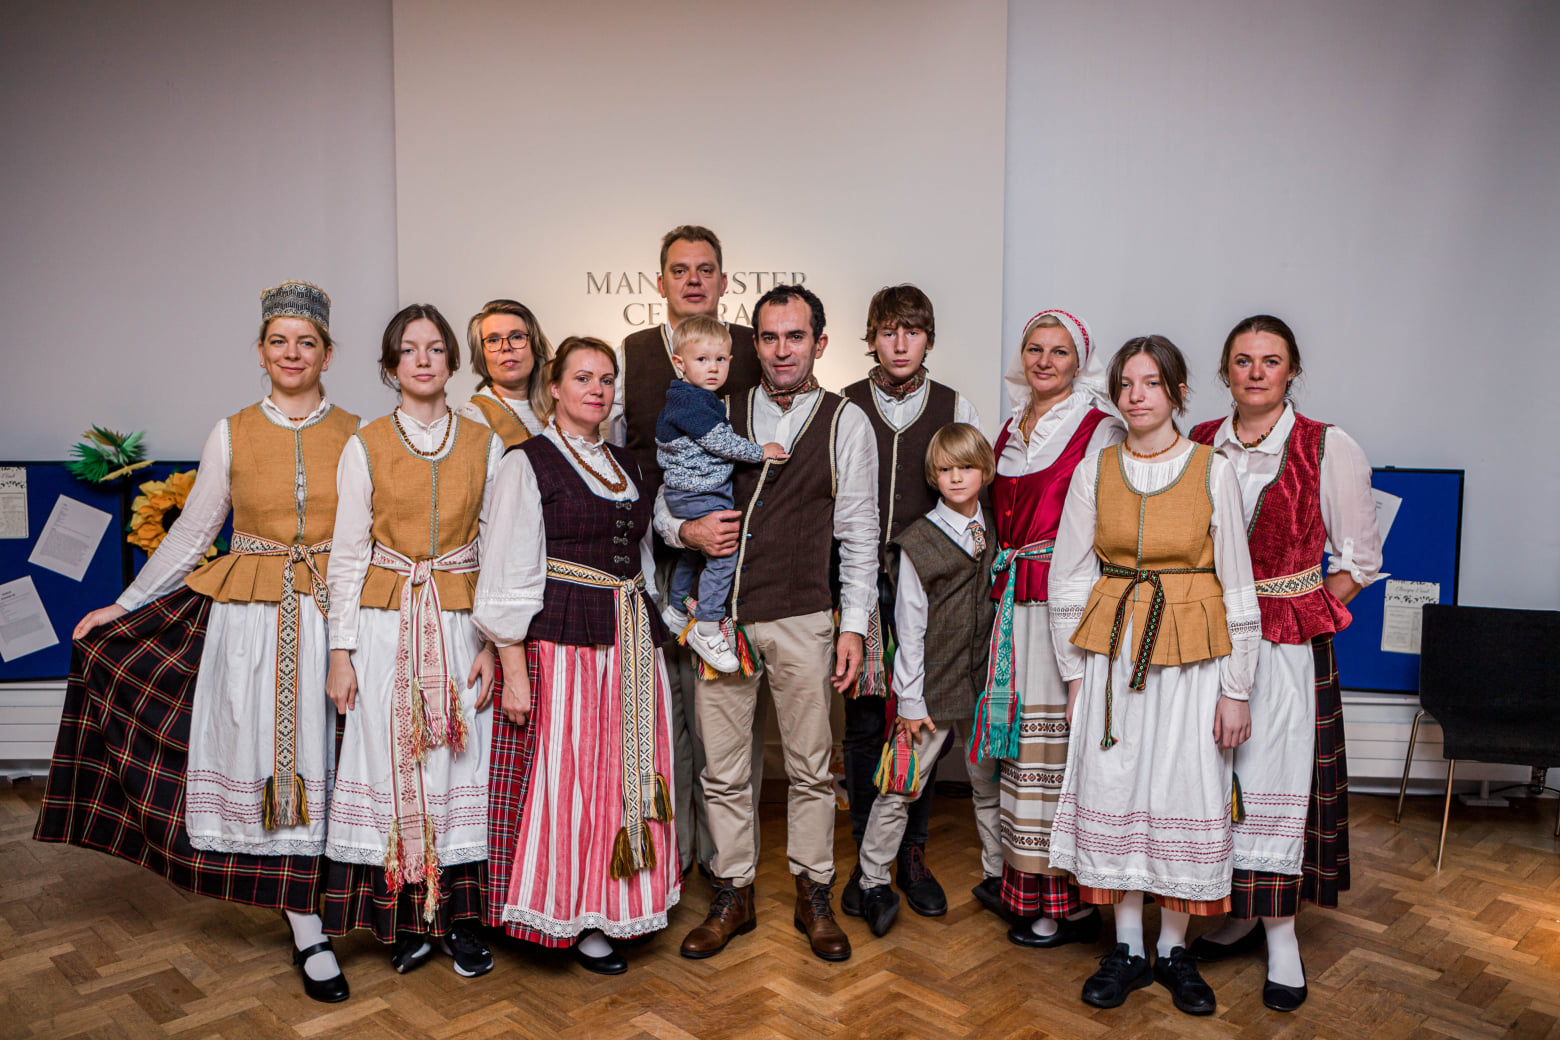 members of the Lithuanian community wearing traditional costume.